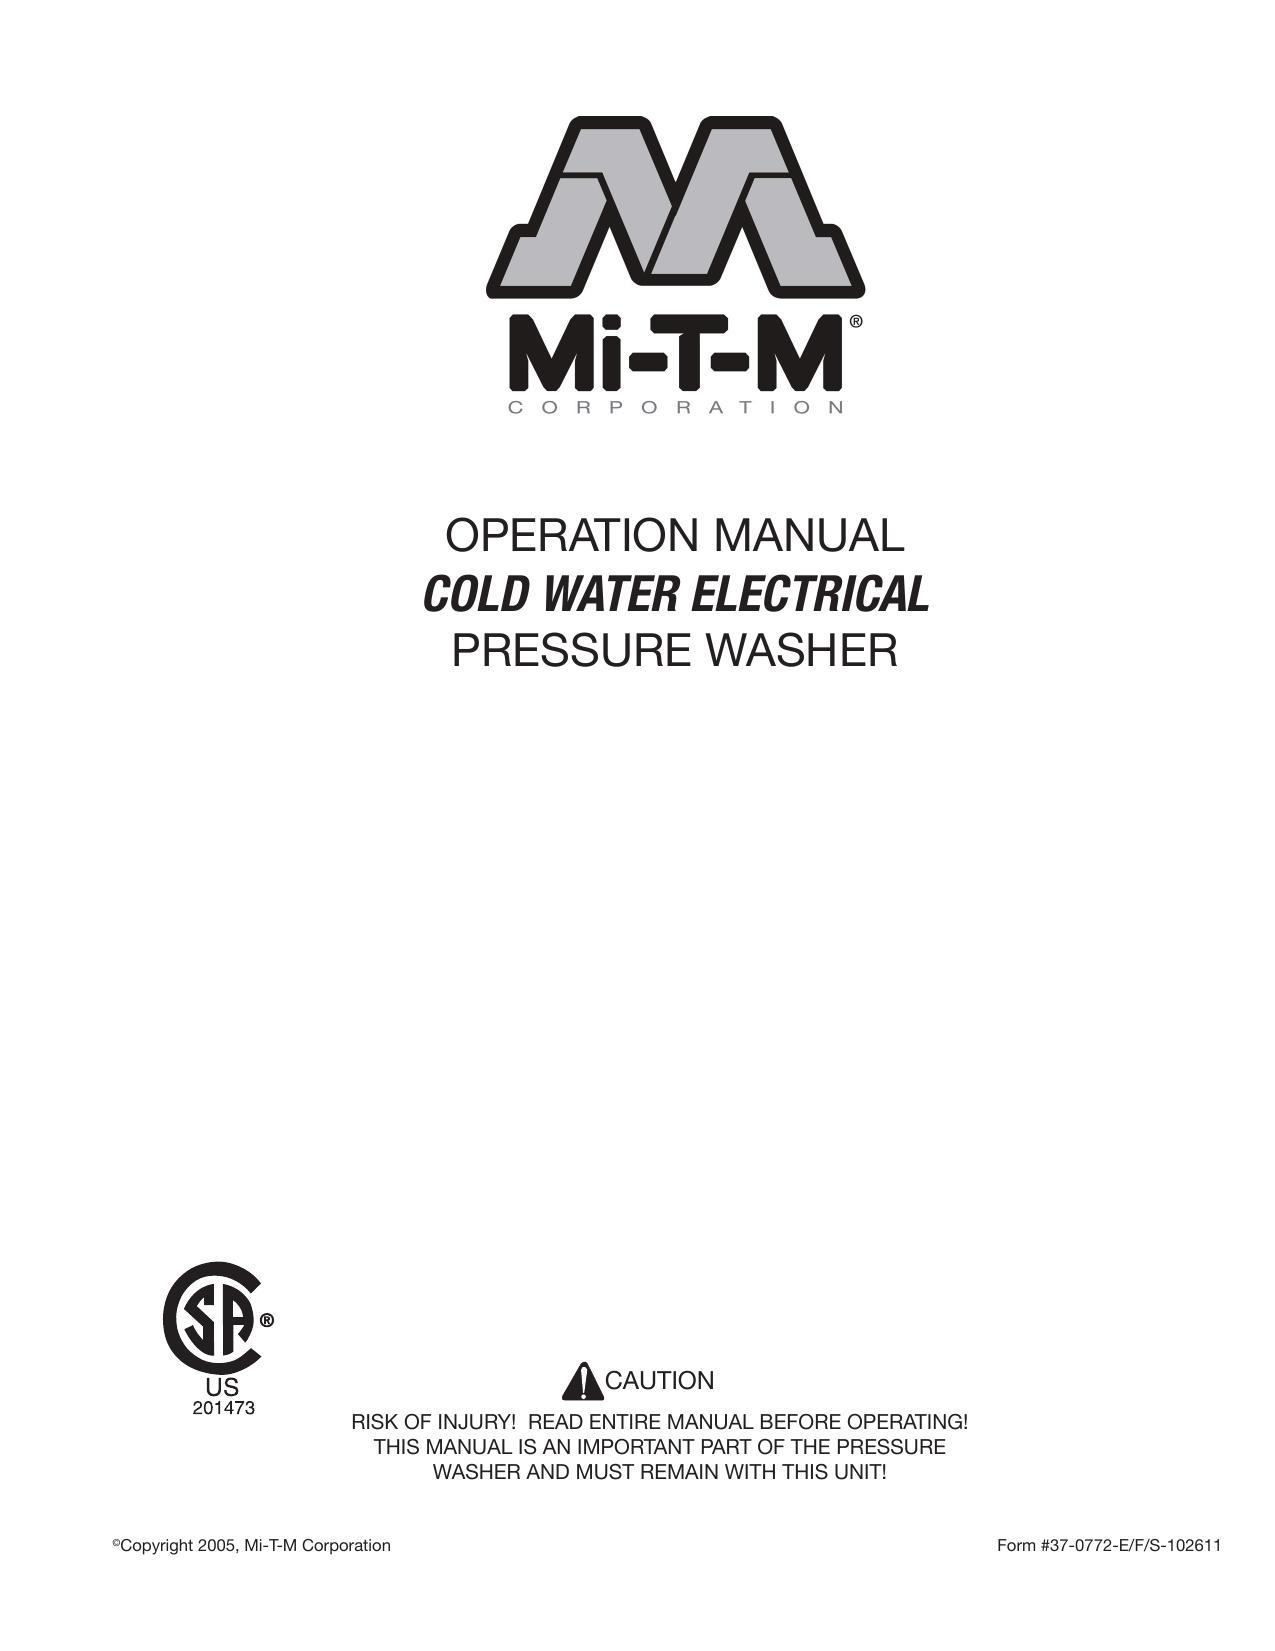 operation-manual-cold-water-electrical-pressure-washer-us-201473.pdf